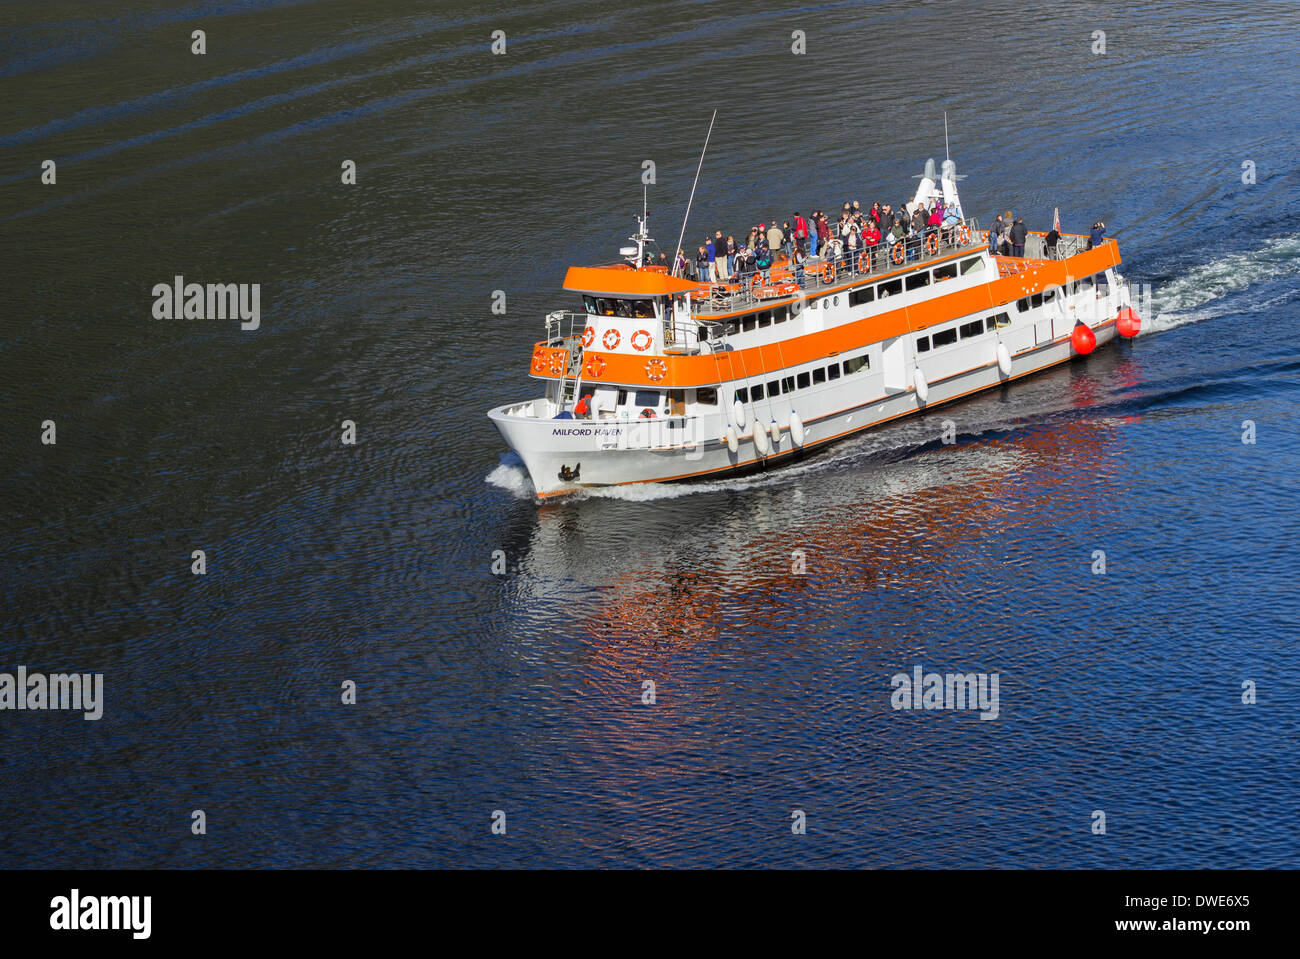 Tourists on Milford Haven ferry boat sailing into Milford Sound on South Island of New Zealand in early morning Stock Photo